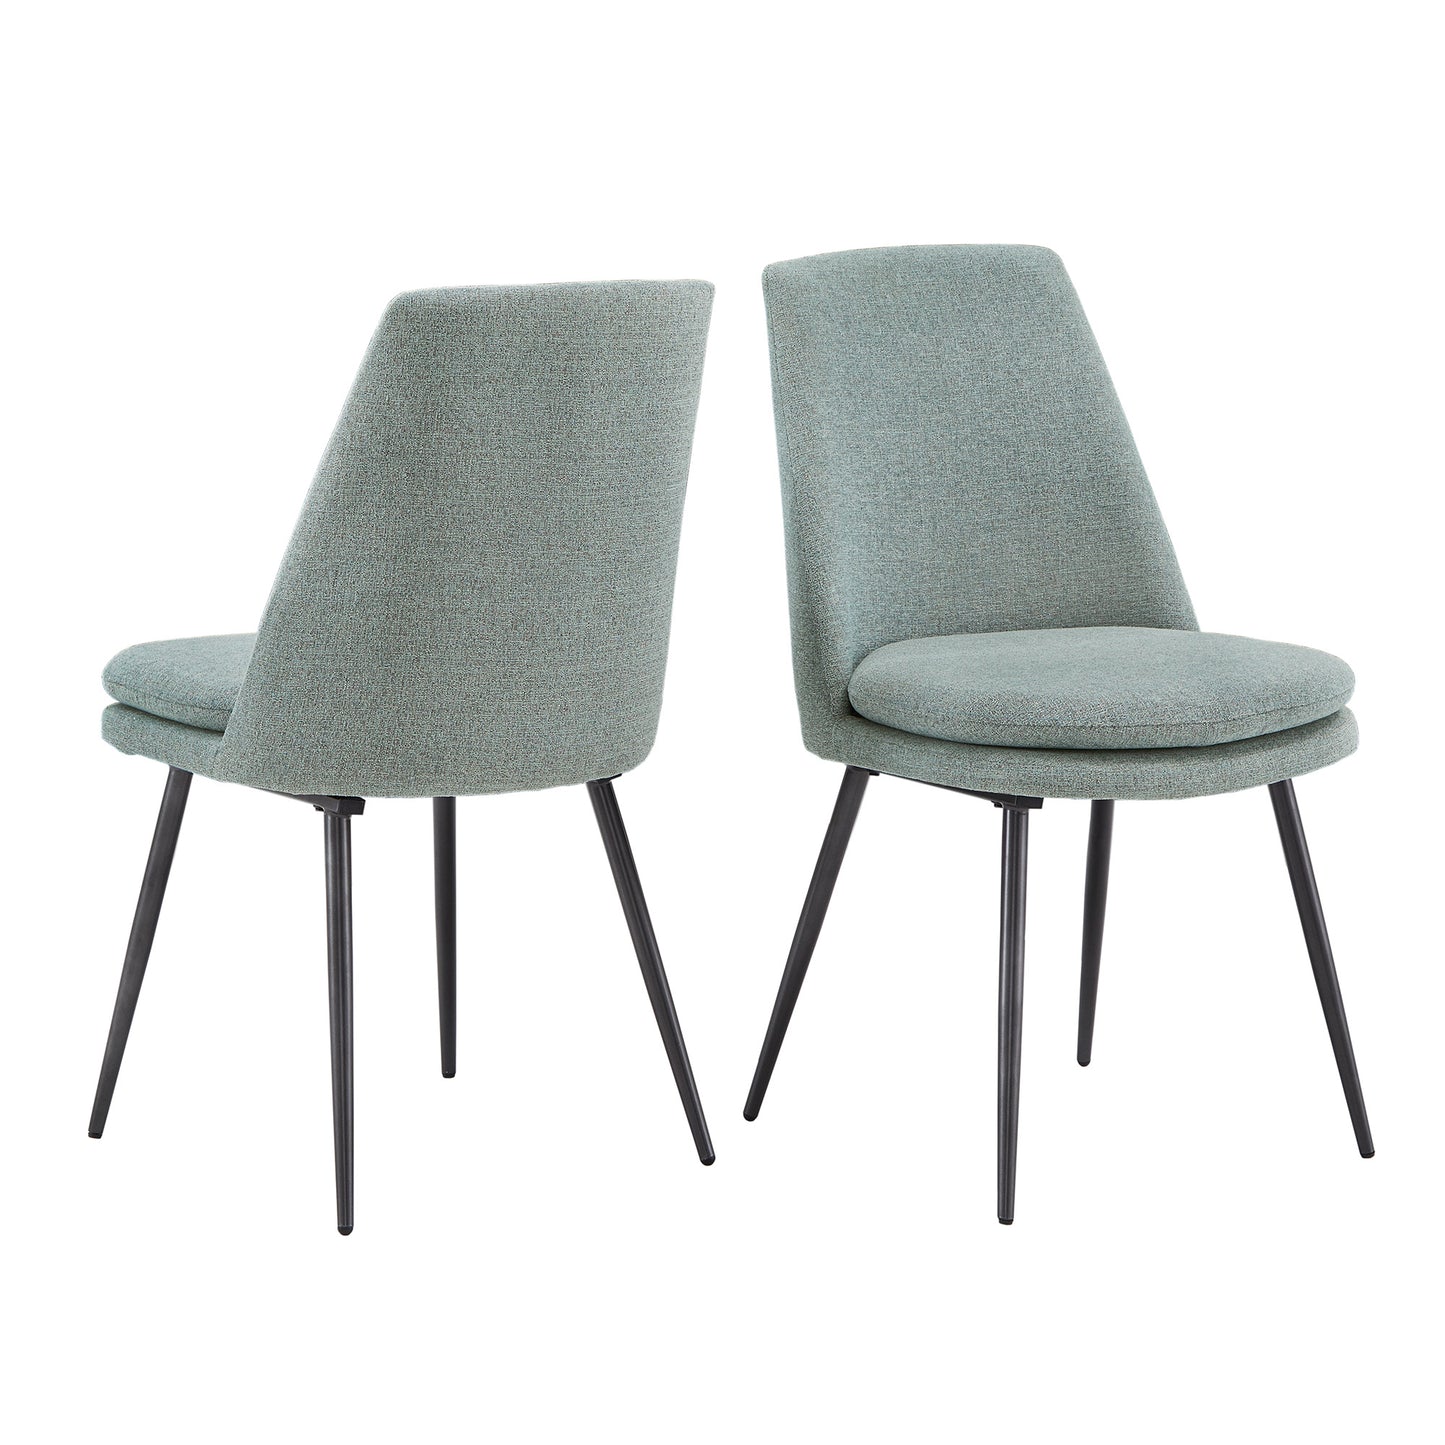 Upholstered Dining Chairs (Set of 2) - Blue Chenille Fabric, Black Legs